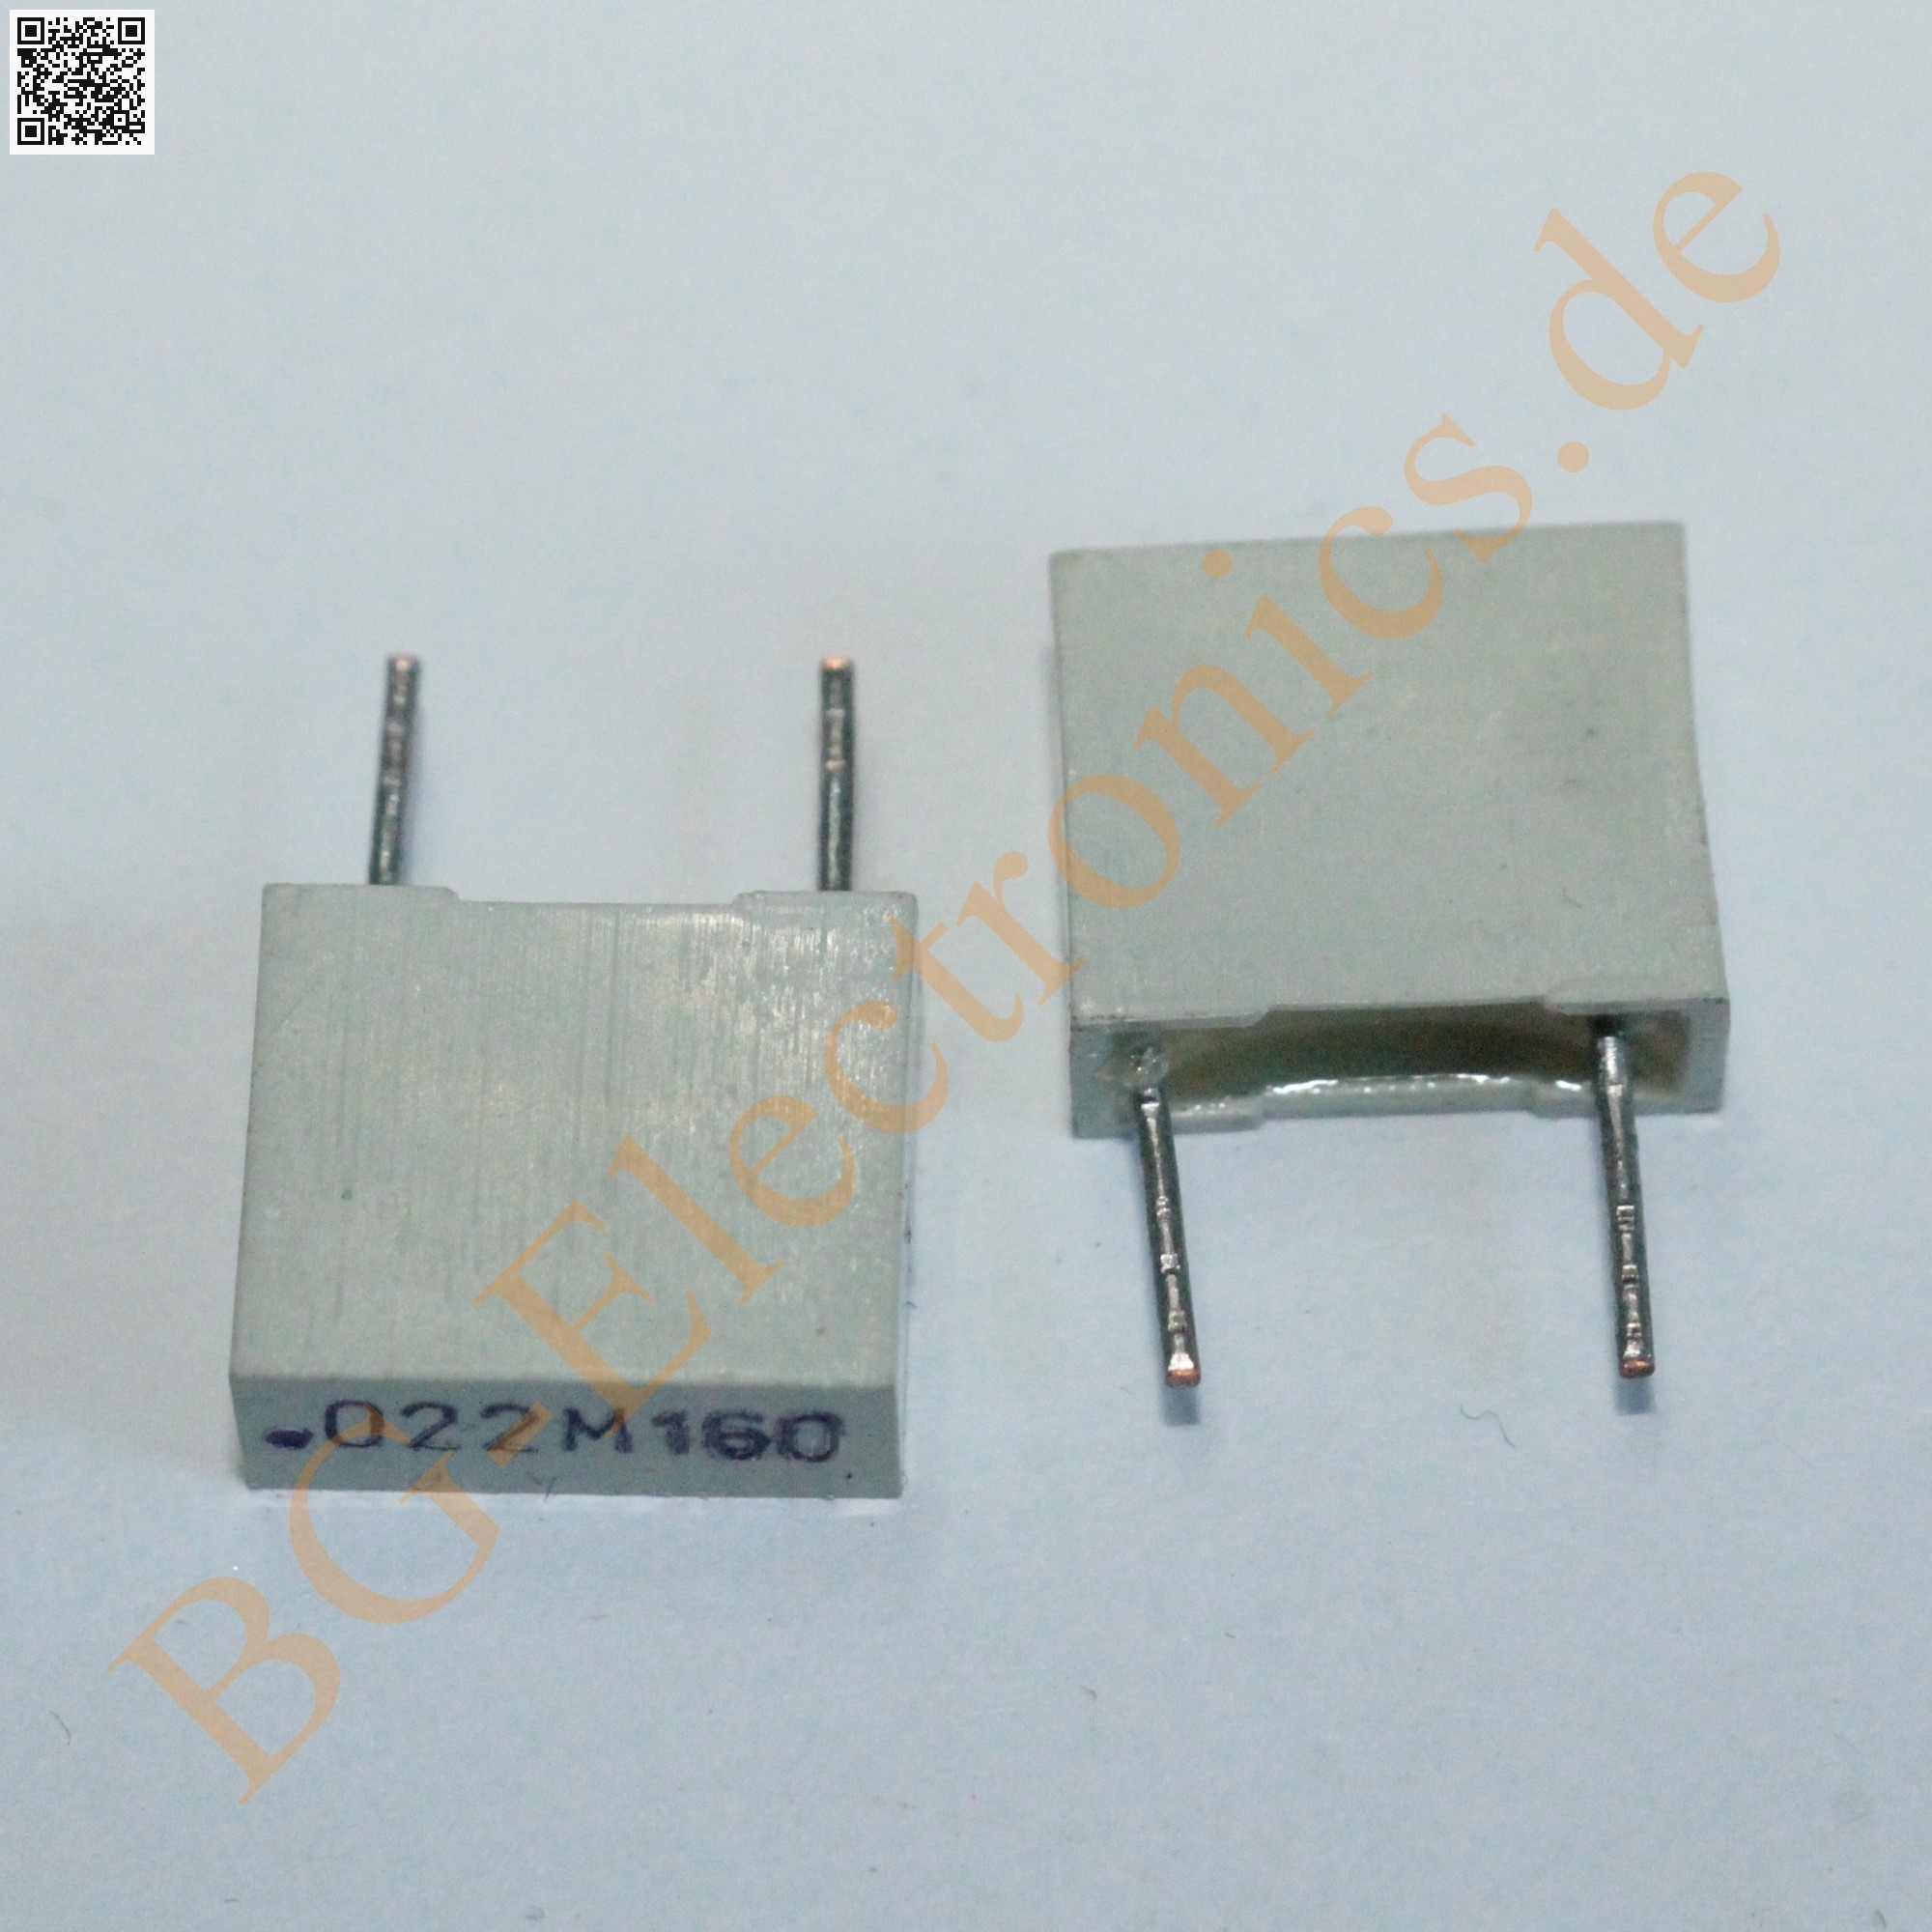 FO-R 0.022uF / 160V / RM7.5